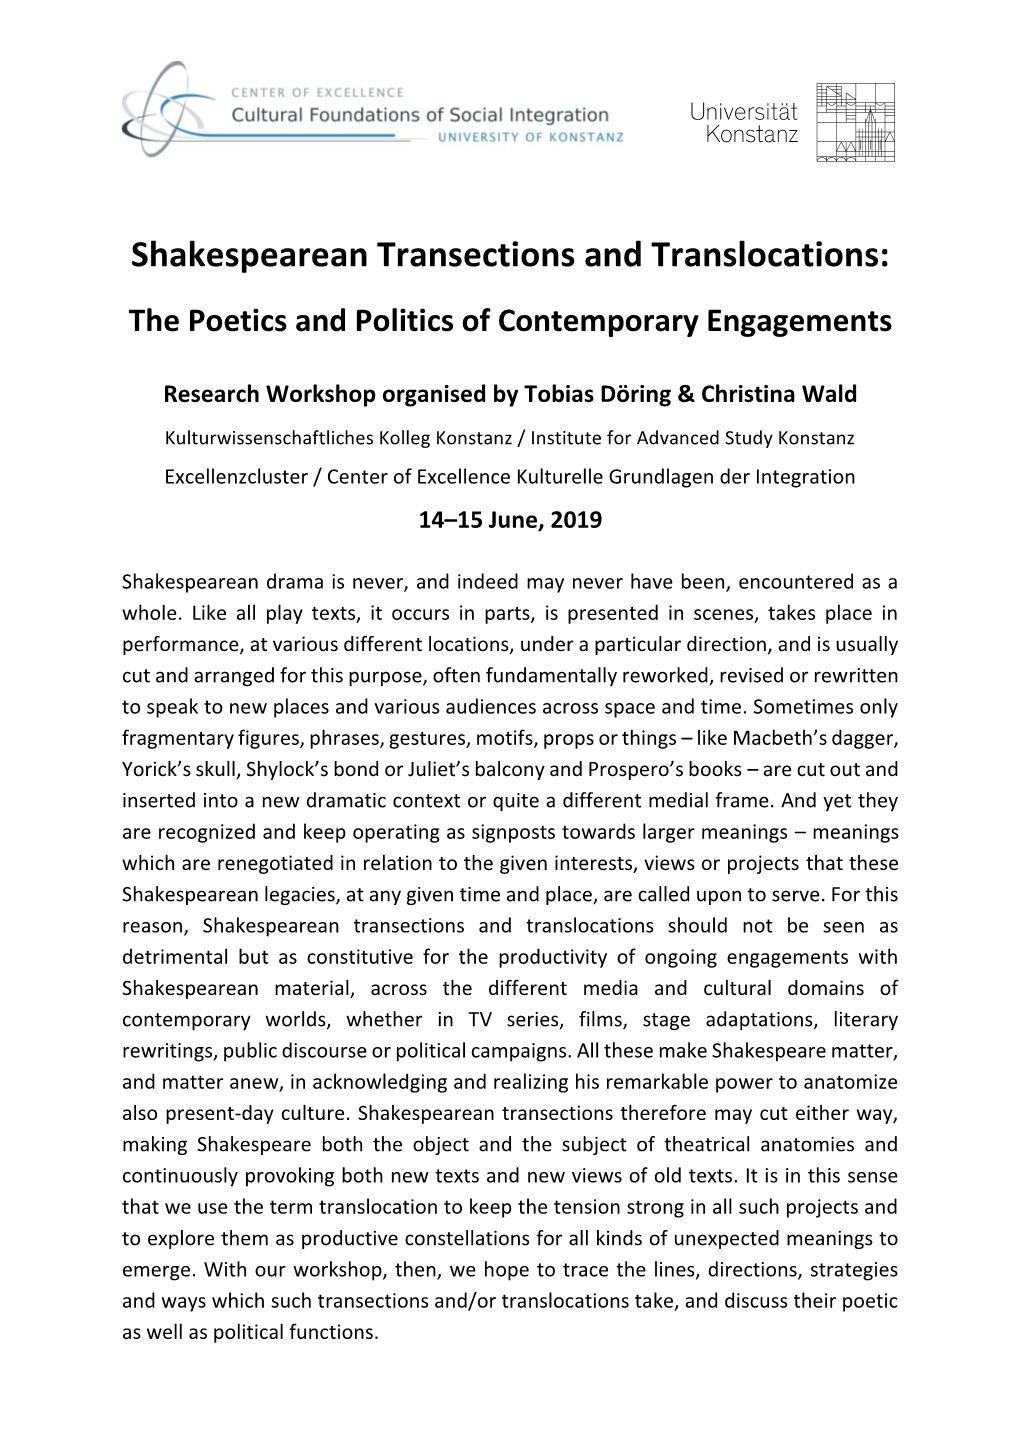 Shakespearean Transections and Translocations: the Poetics and Politics of Contemporary Engagements